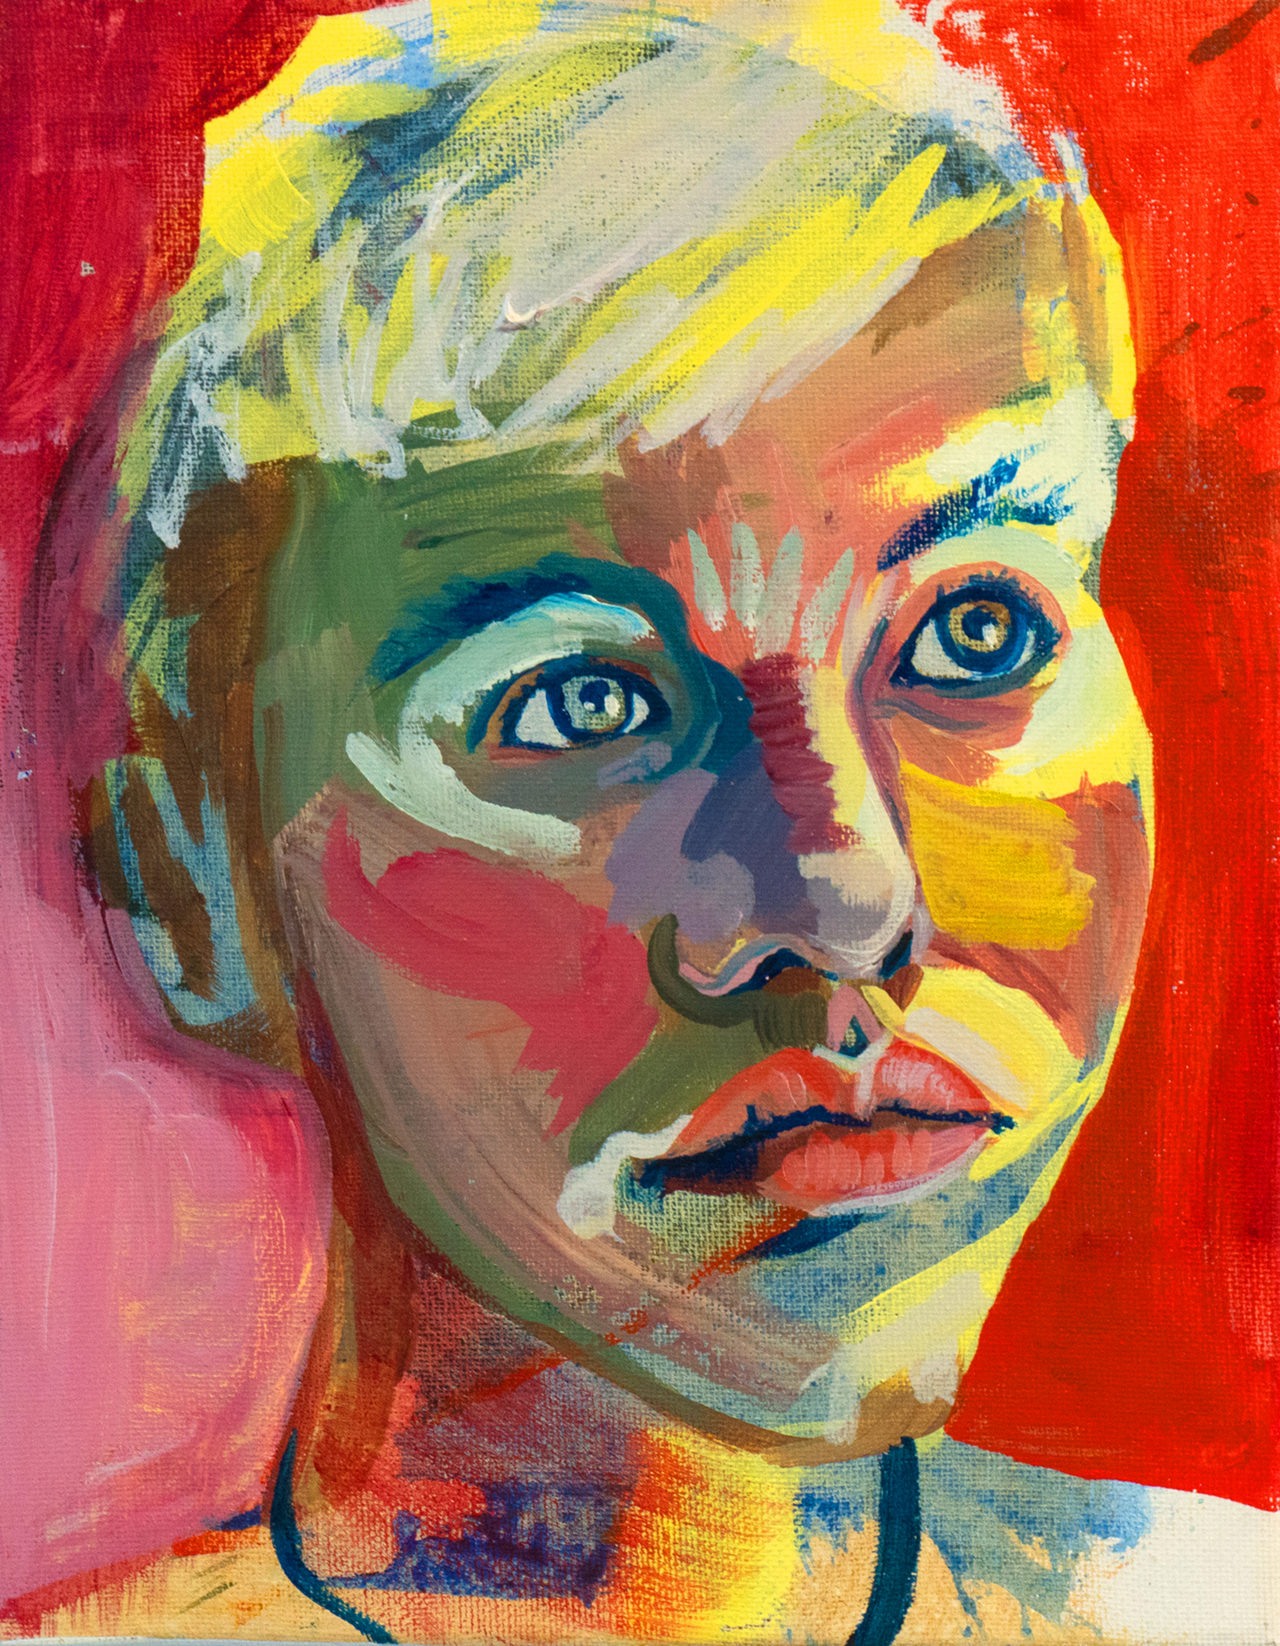 "All the hopes and dreams" by Mason Gehring. 
Mason Gehring introduces herself through a series of self-portraits, each characterized by broad brush strokes, expressive eyes, and masks of white house paint. I see her daydreaming in “All the Hopes and Dreams,” then staring right at me in “Hard Look.” And though these paintings aren’t the least bit photorealistic, I can see and feel the real woman behind them. She is I, and I am Thou.